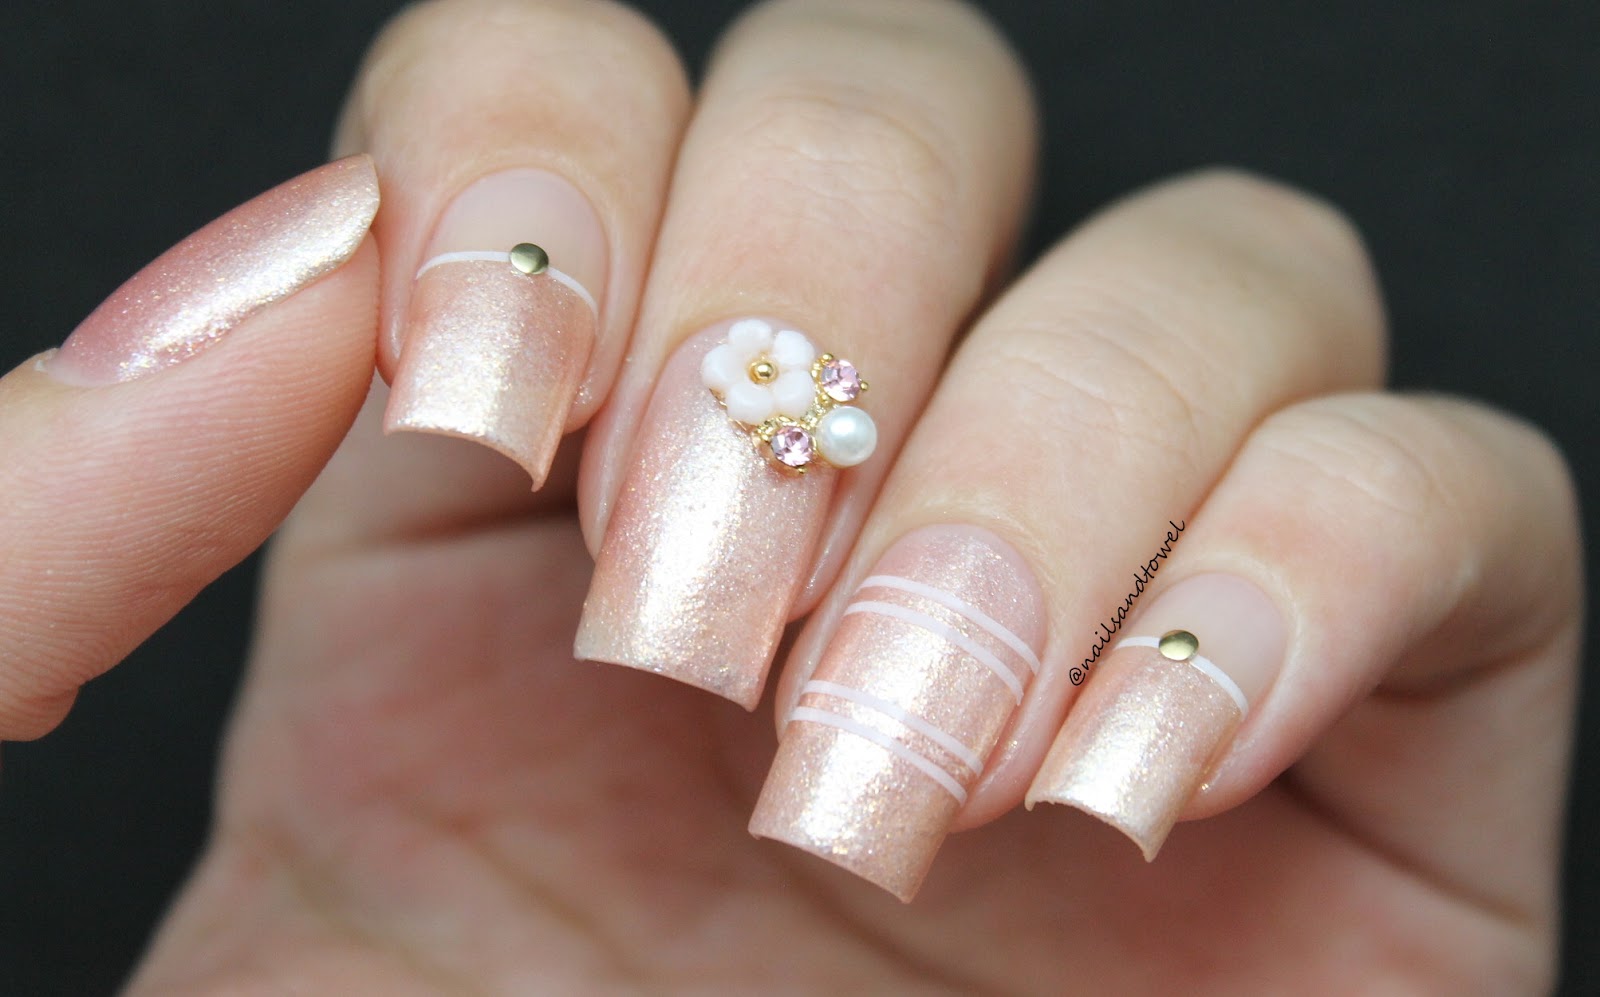 10. Pink Gel Nails: The Perfect Choice for a Romantic Date Night Look - wide 3